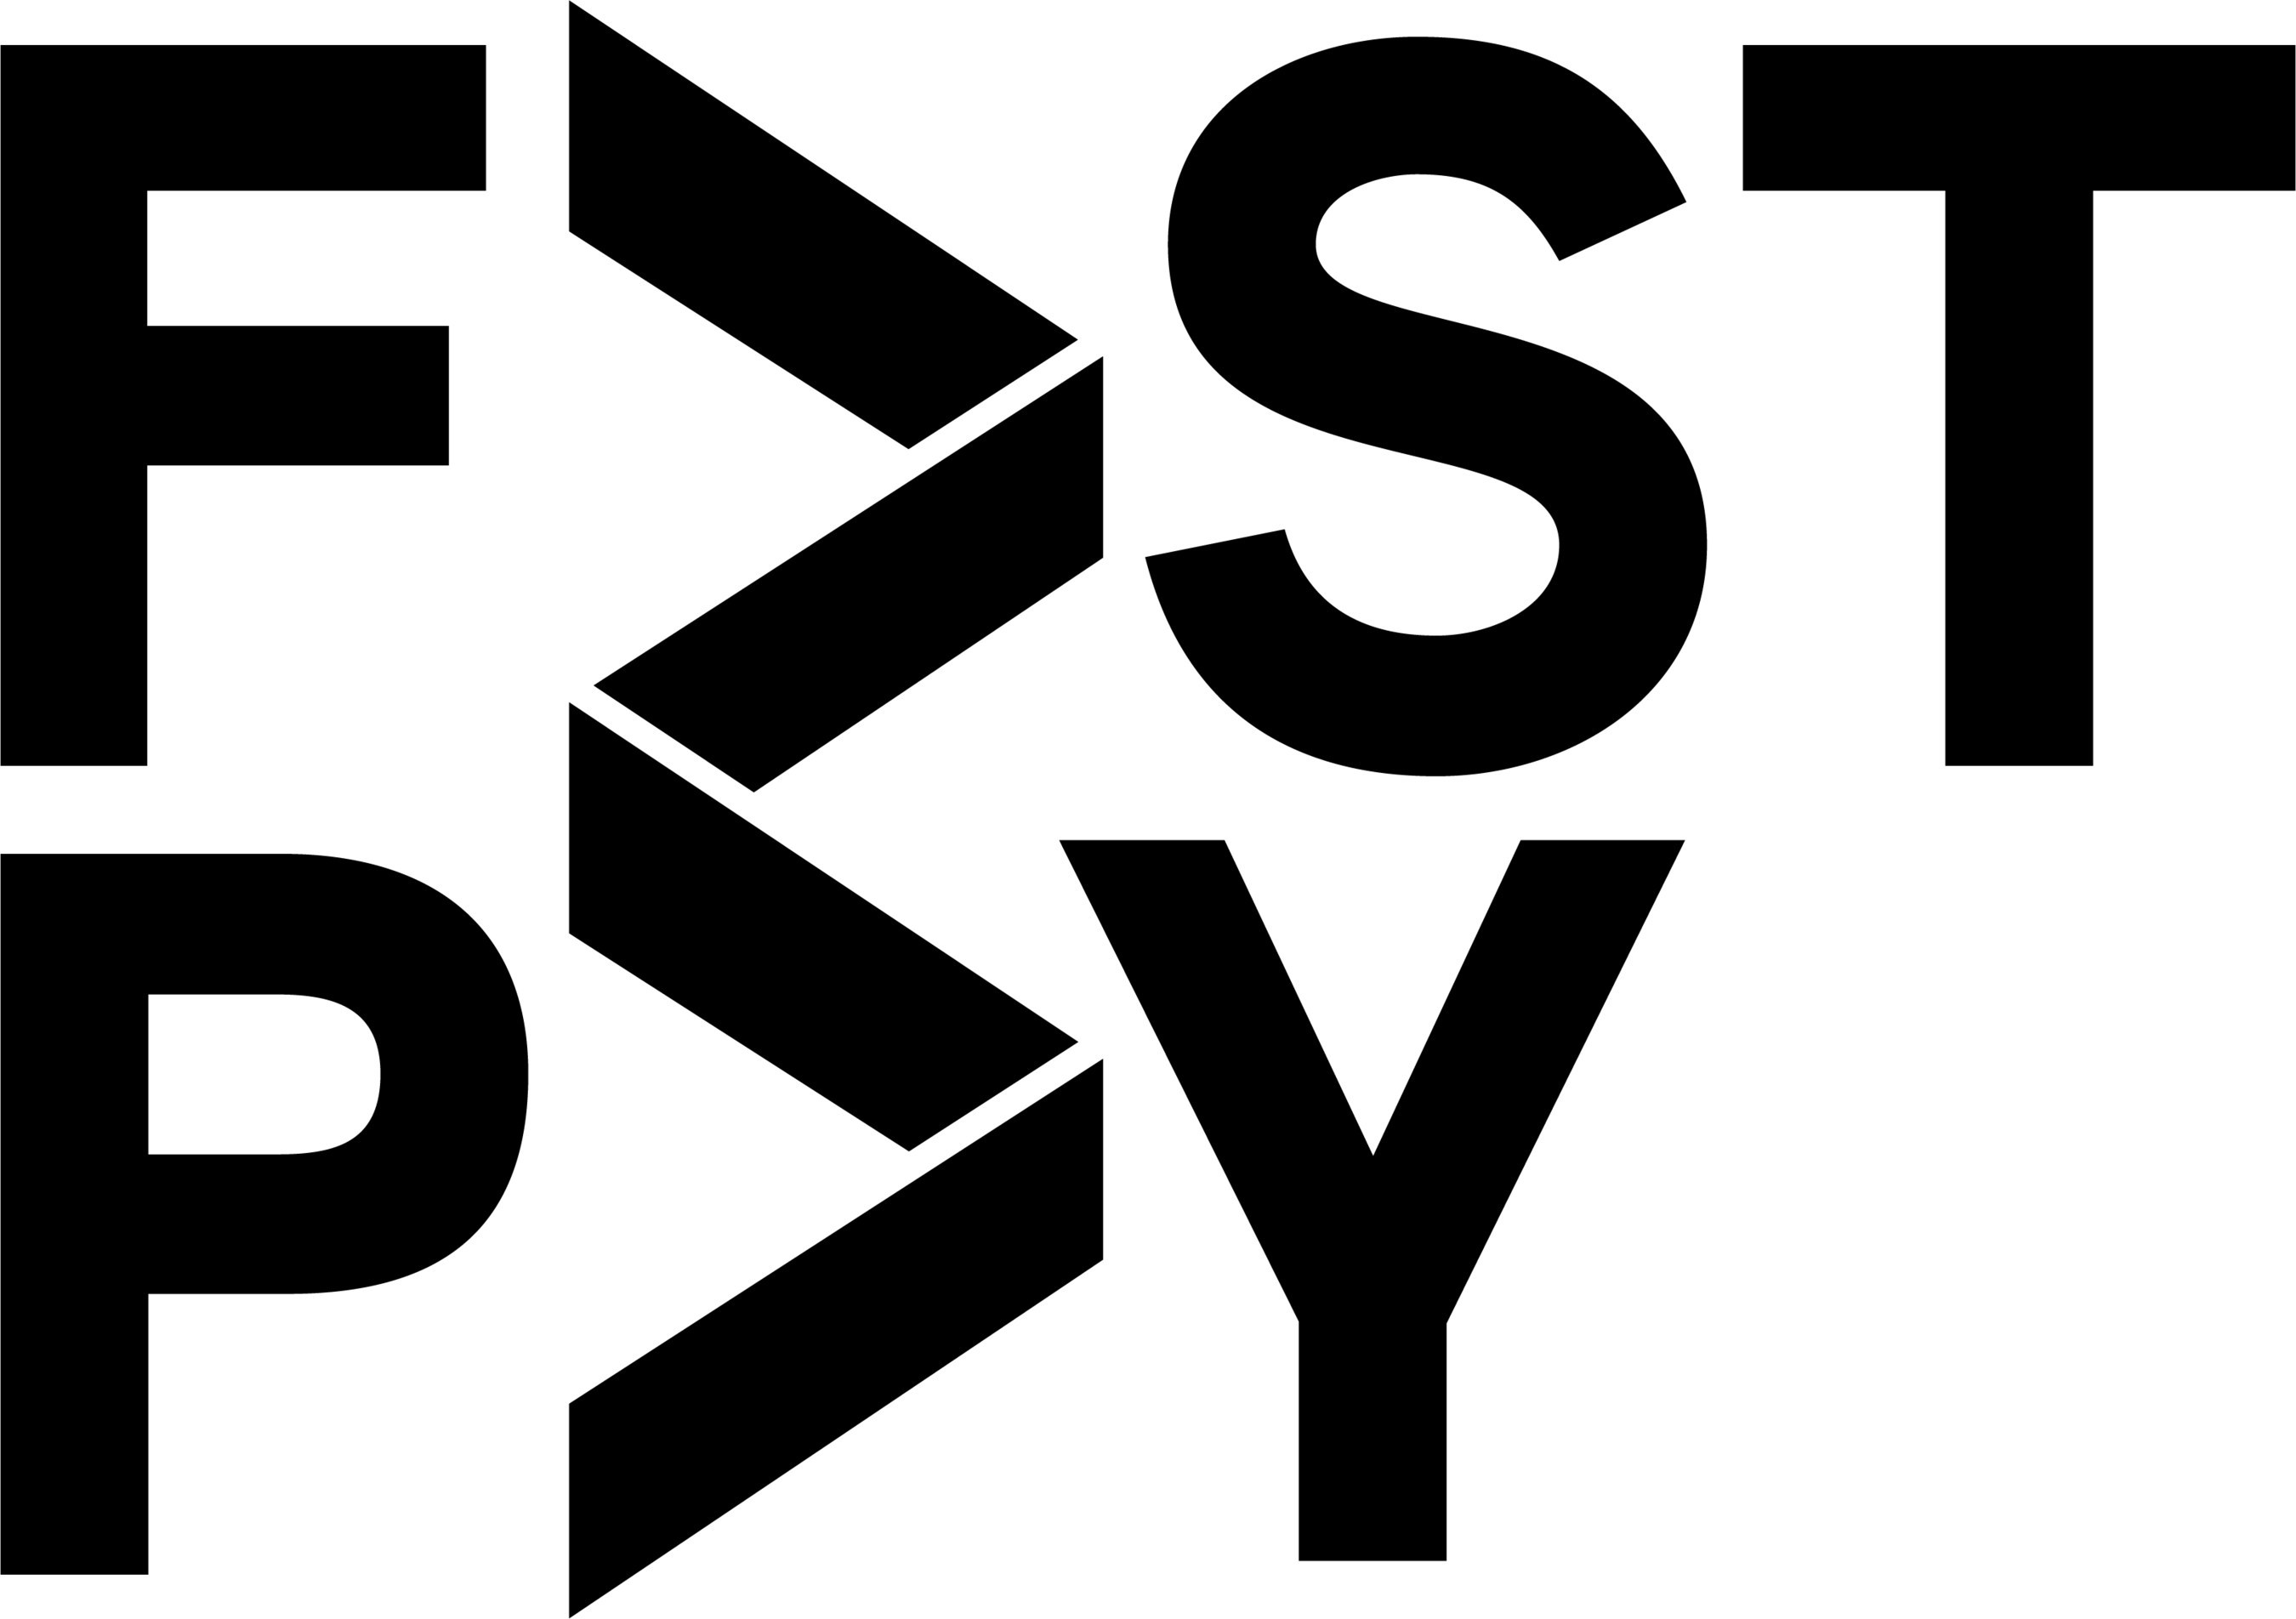 FastPay Announces Alliance with Advantage Software